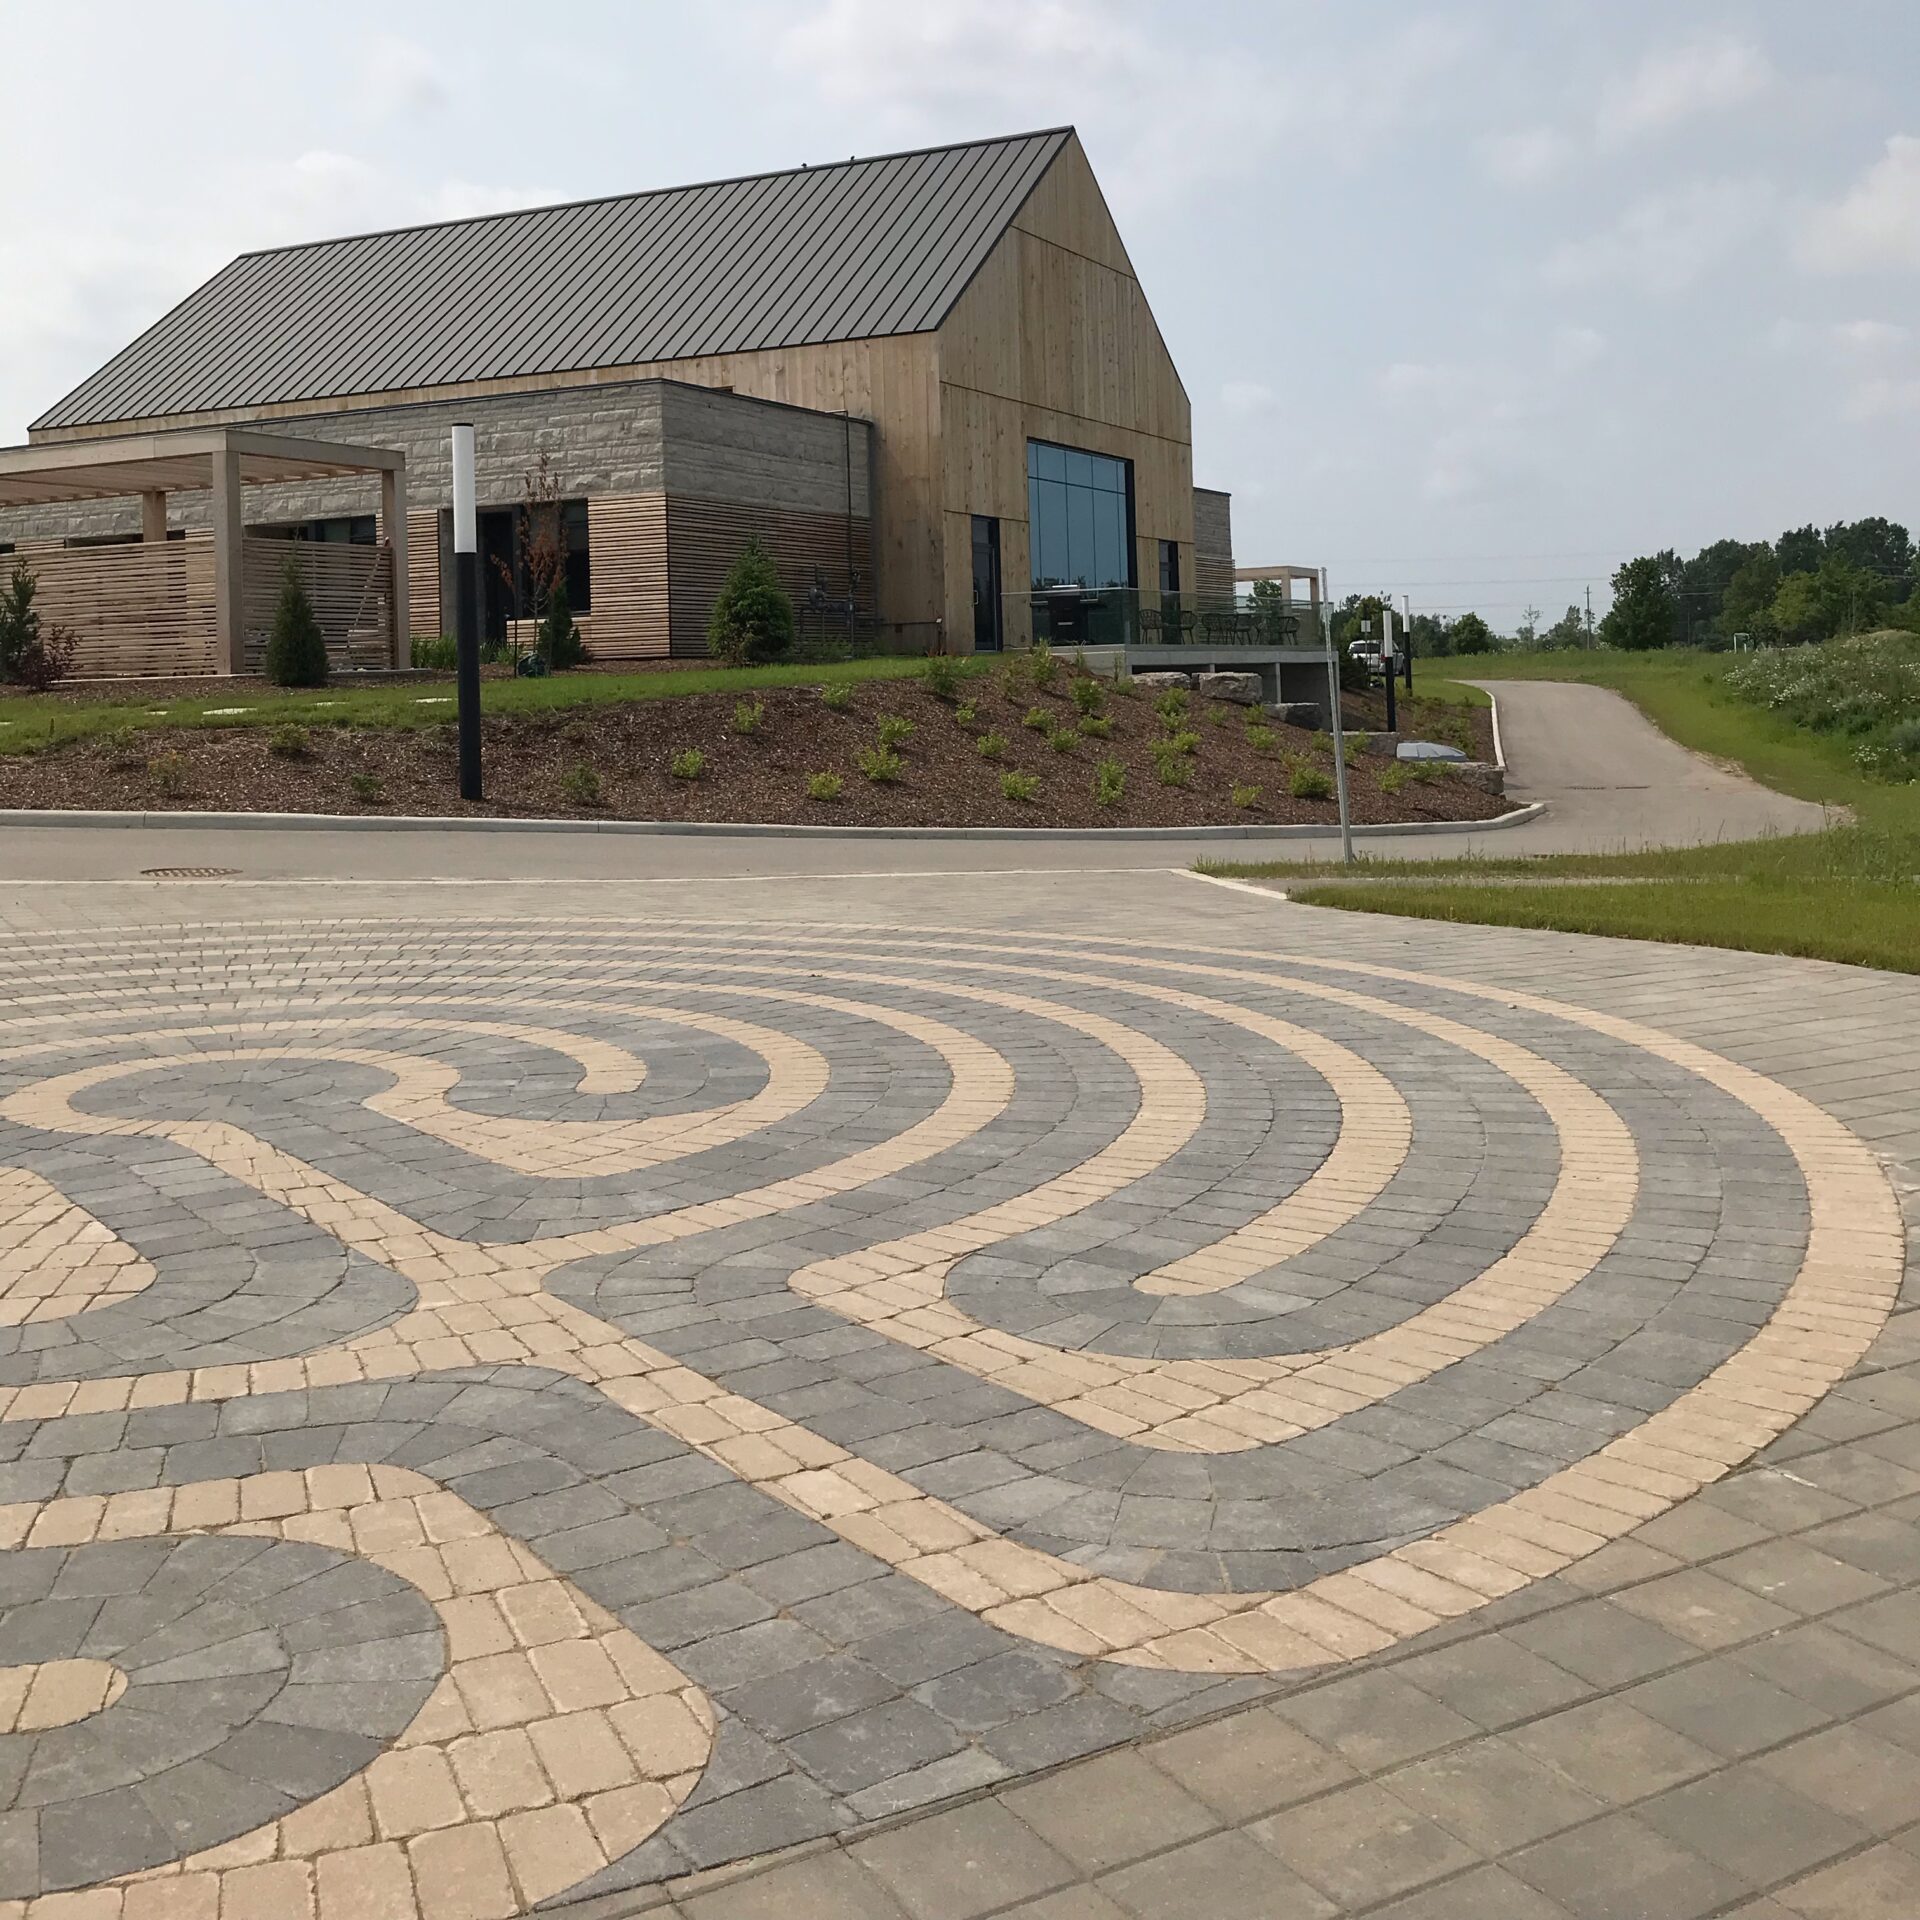 The labyrinth at The Gies Family Centre